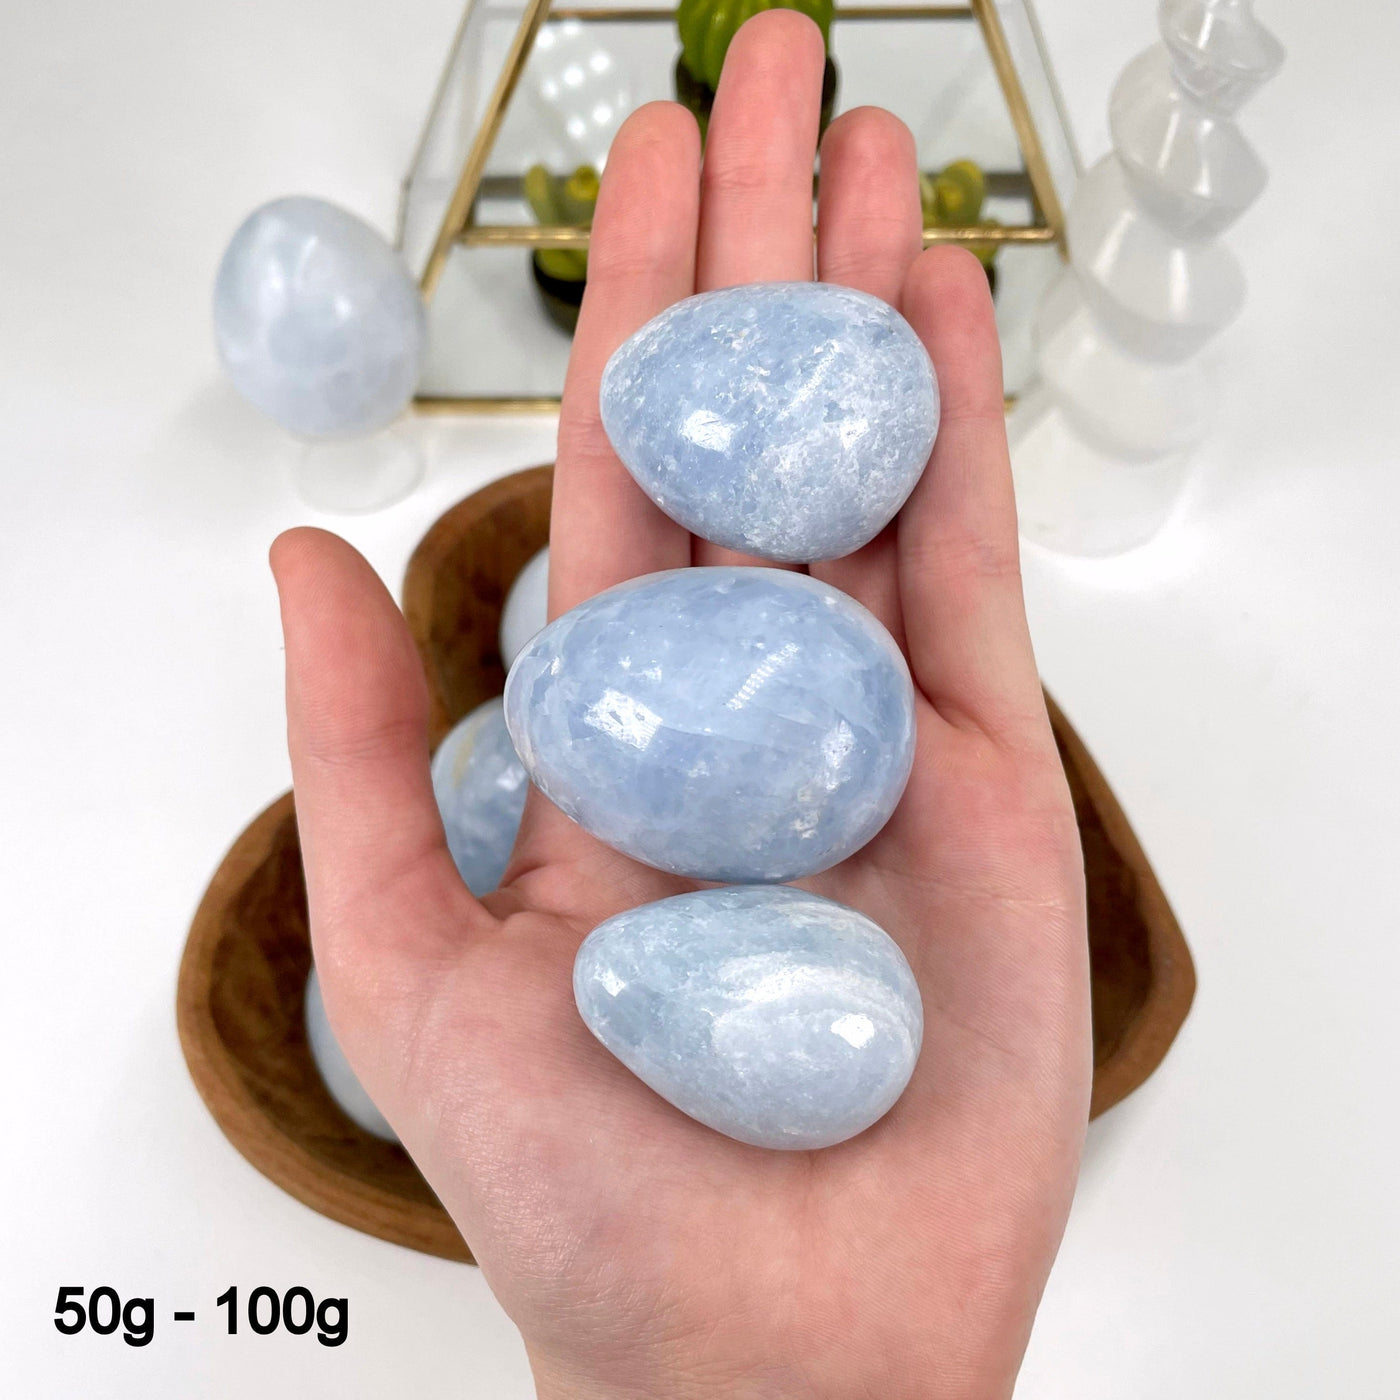 three 50g - 100g blue calcite polished eggs in hand for size reference and possible variations